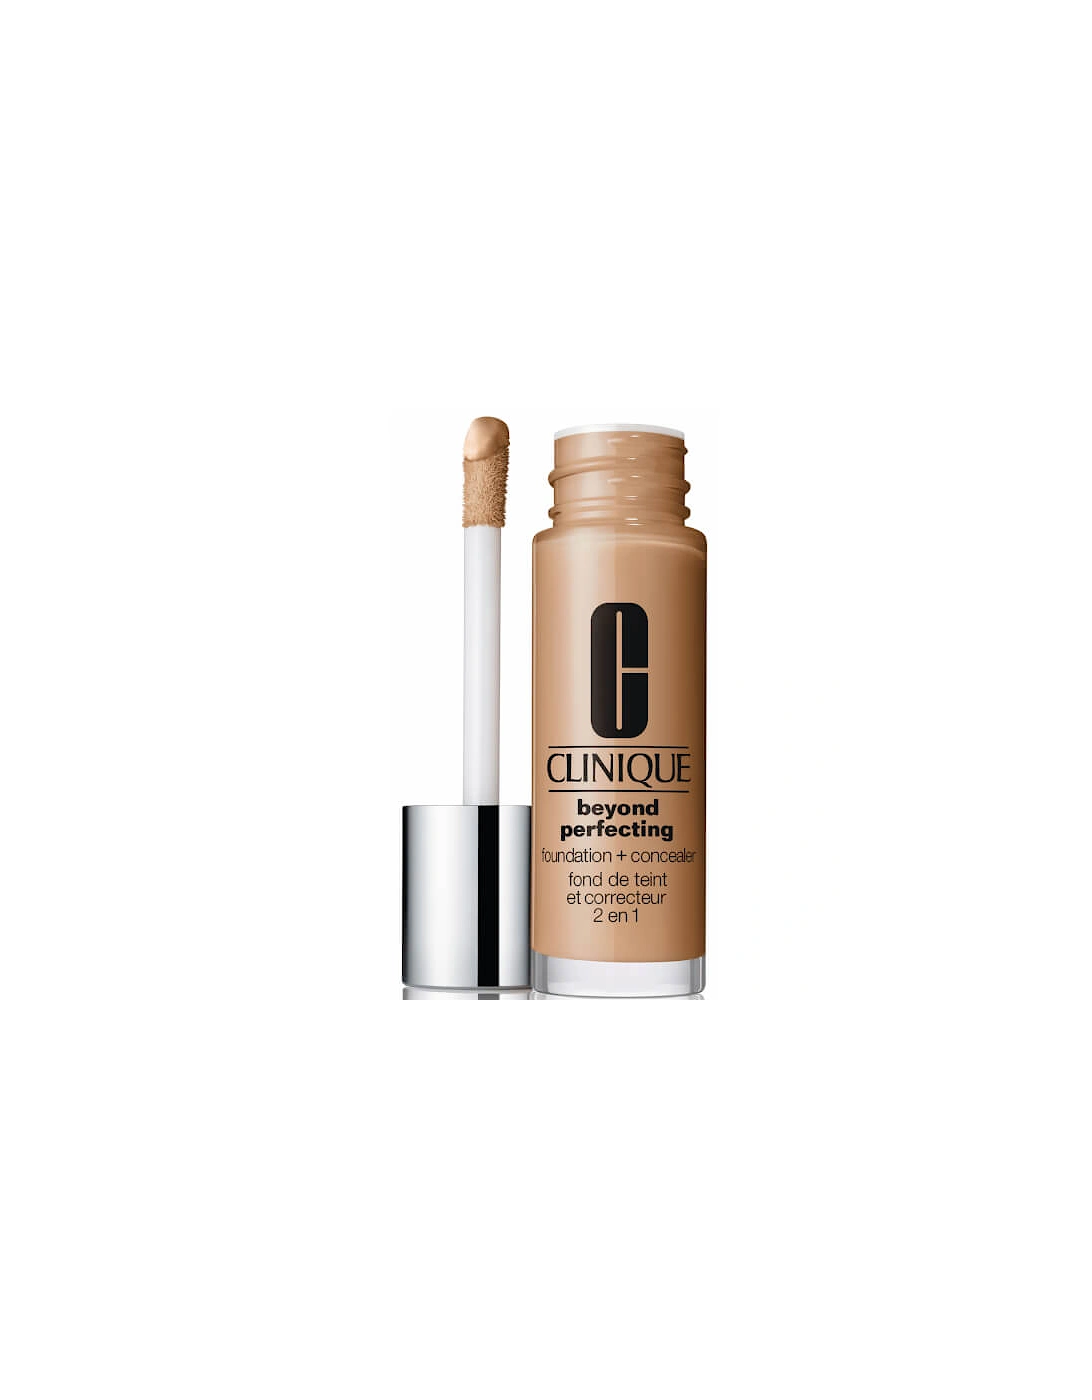 Beyond Perfecting Foundation and Concealer Nutty, 2 of 1